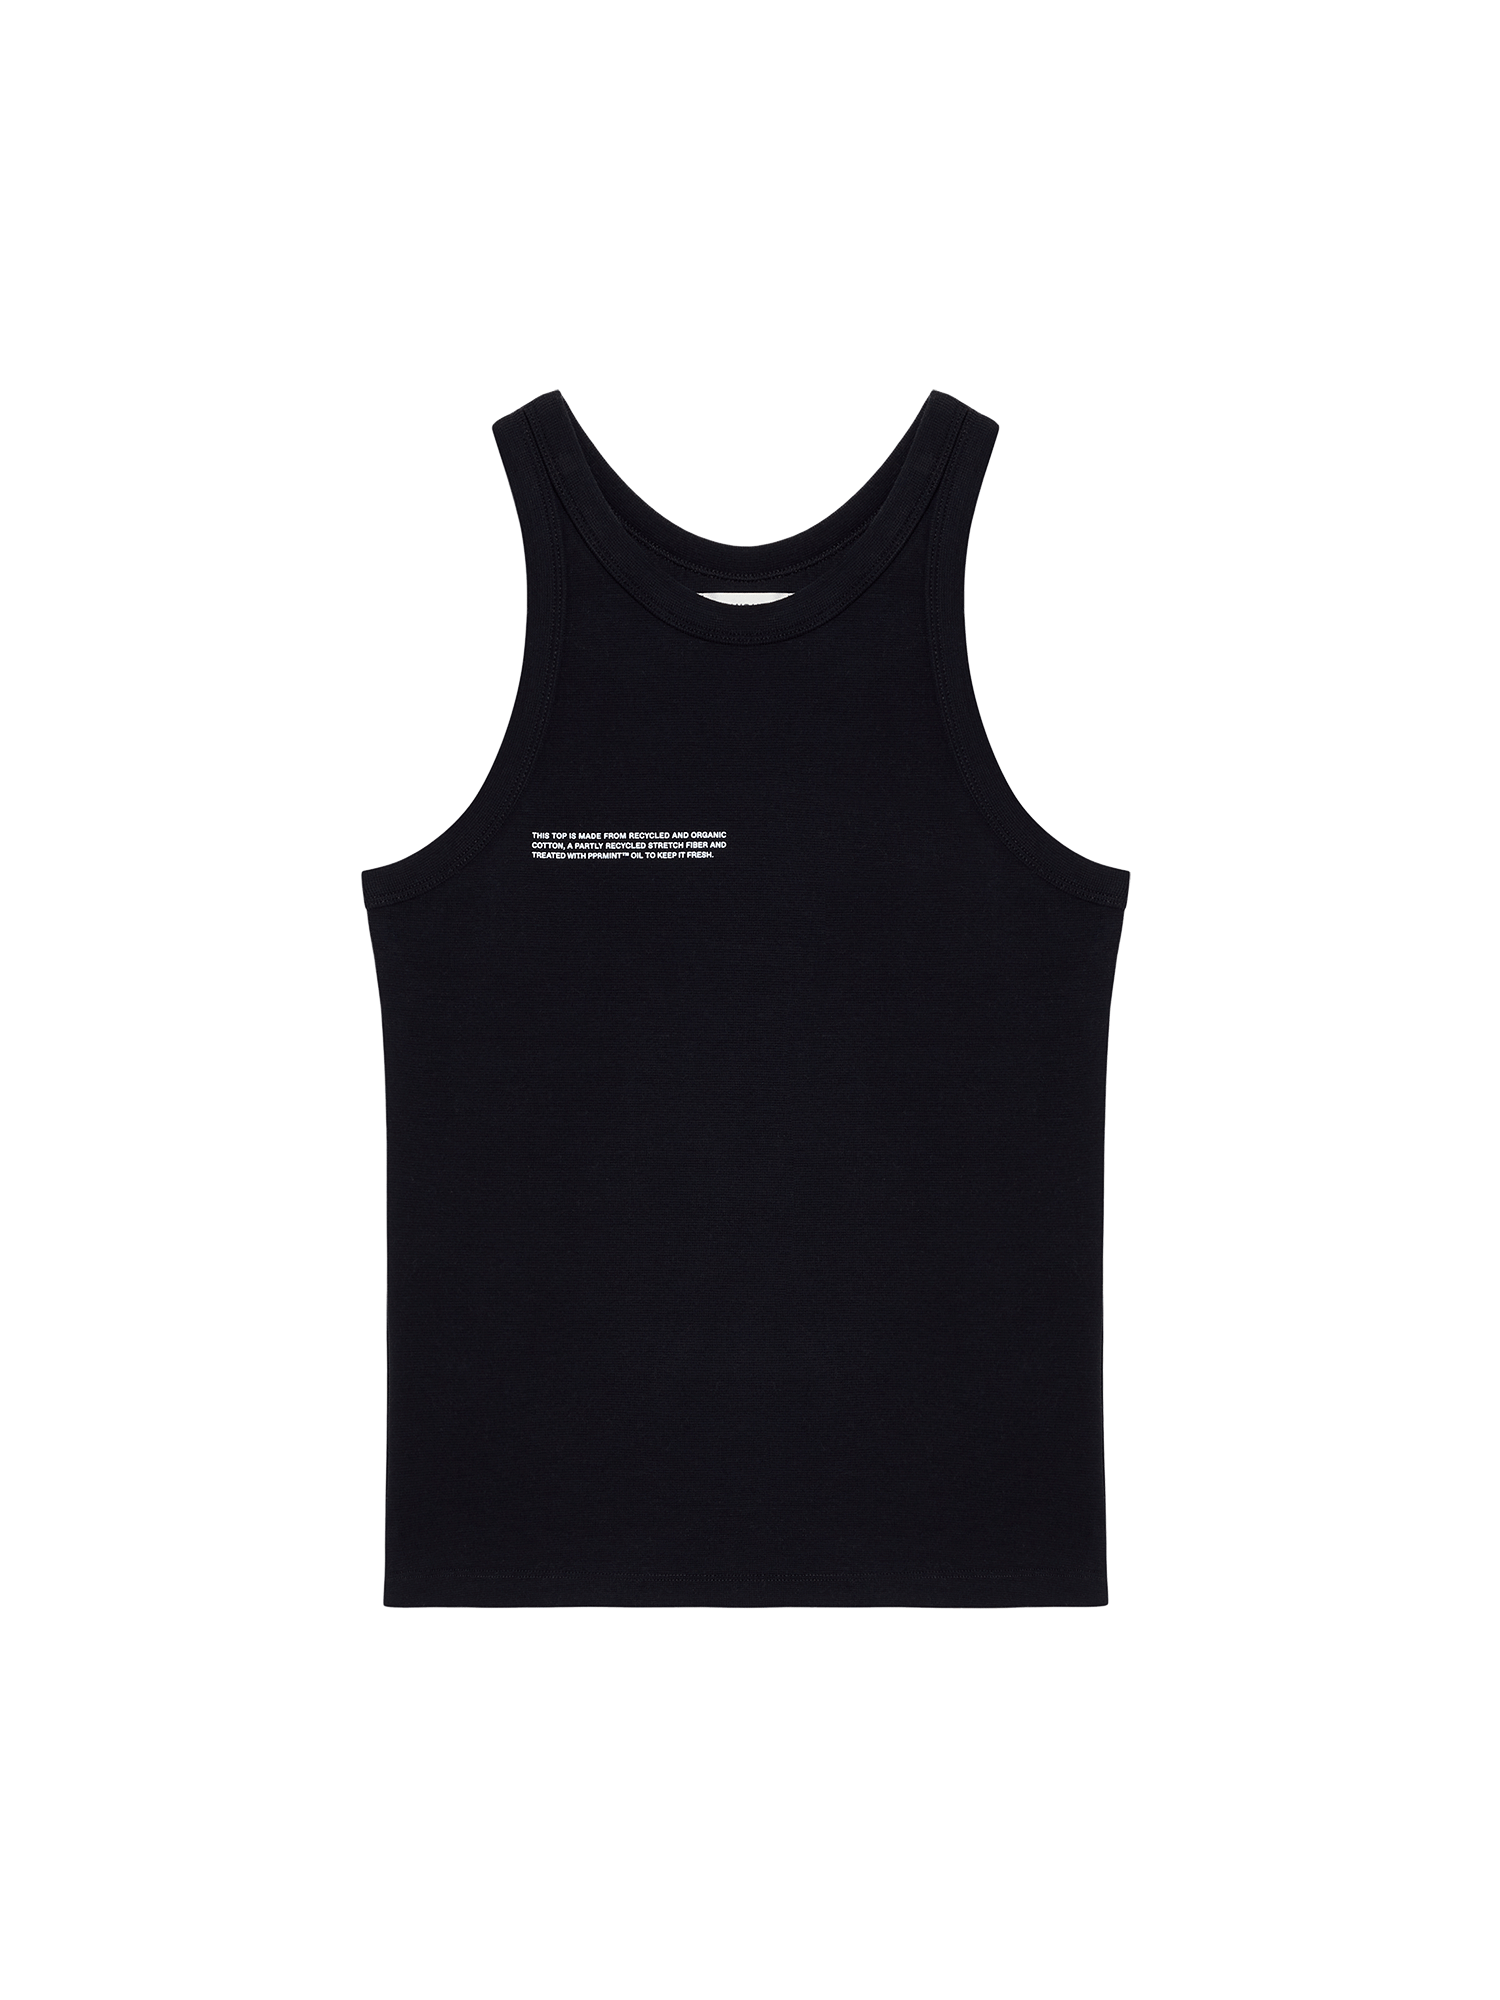 Women's Recycled Cotton Tank Top—black